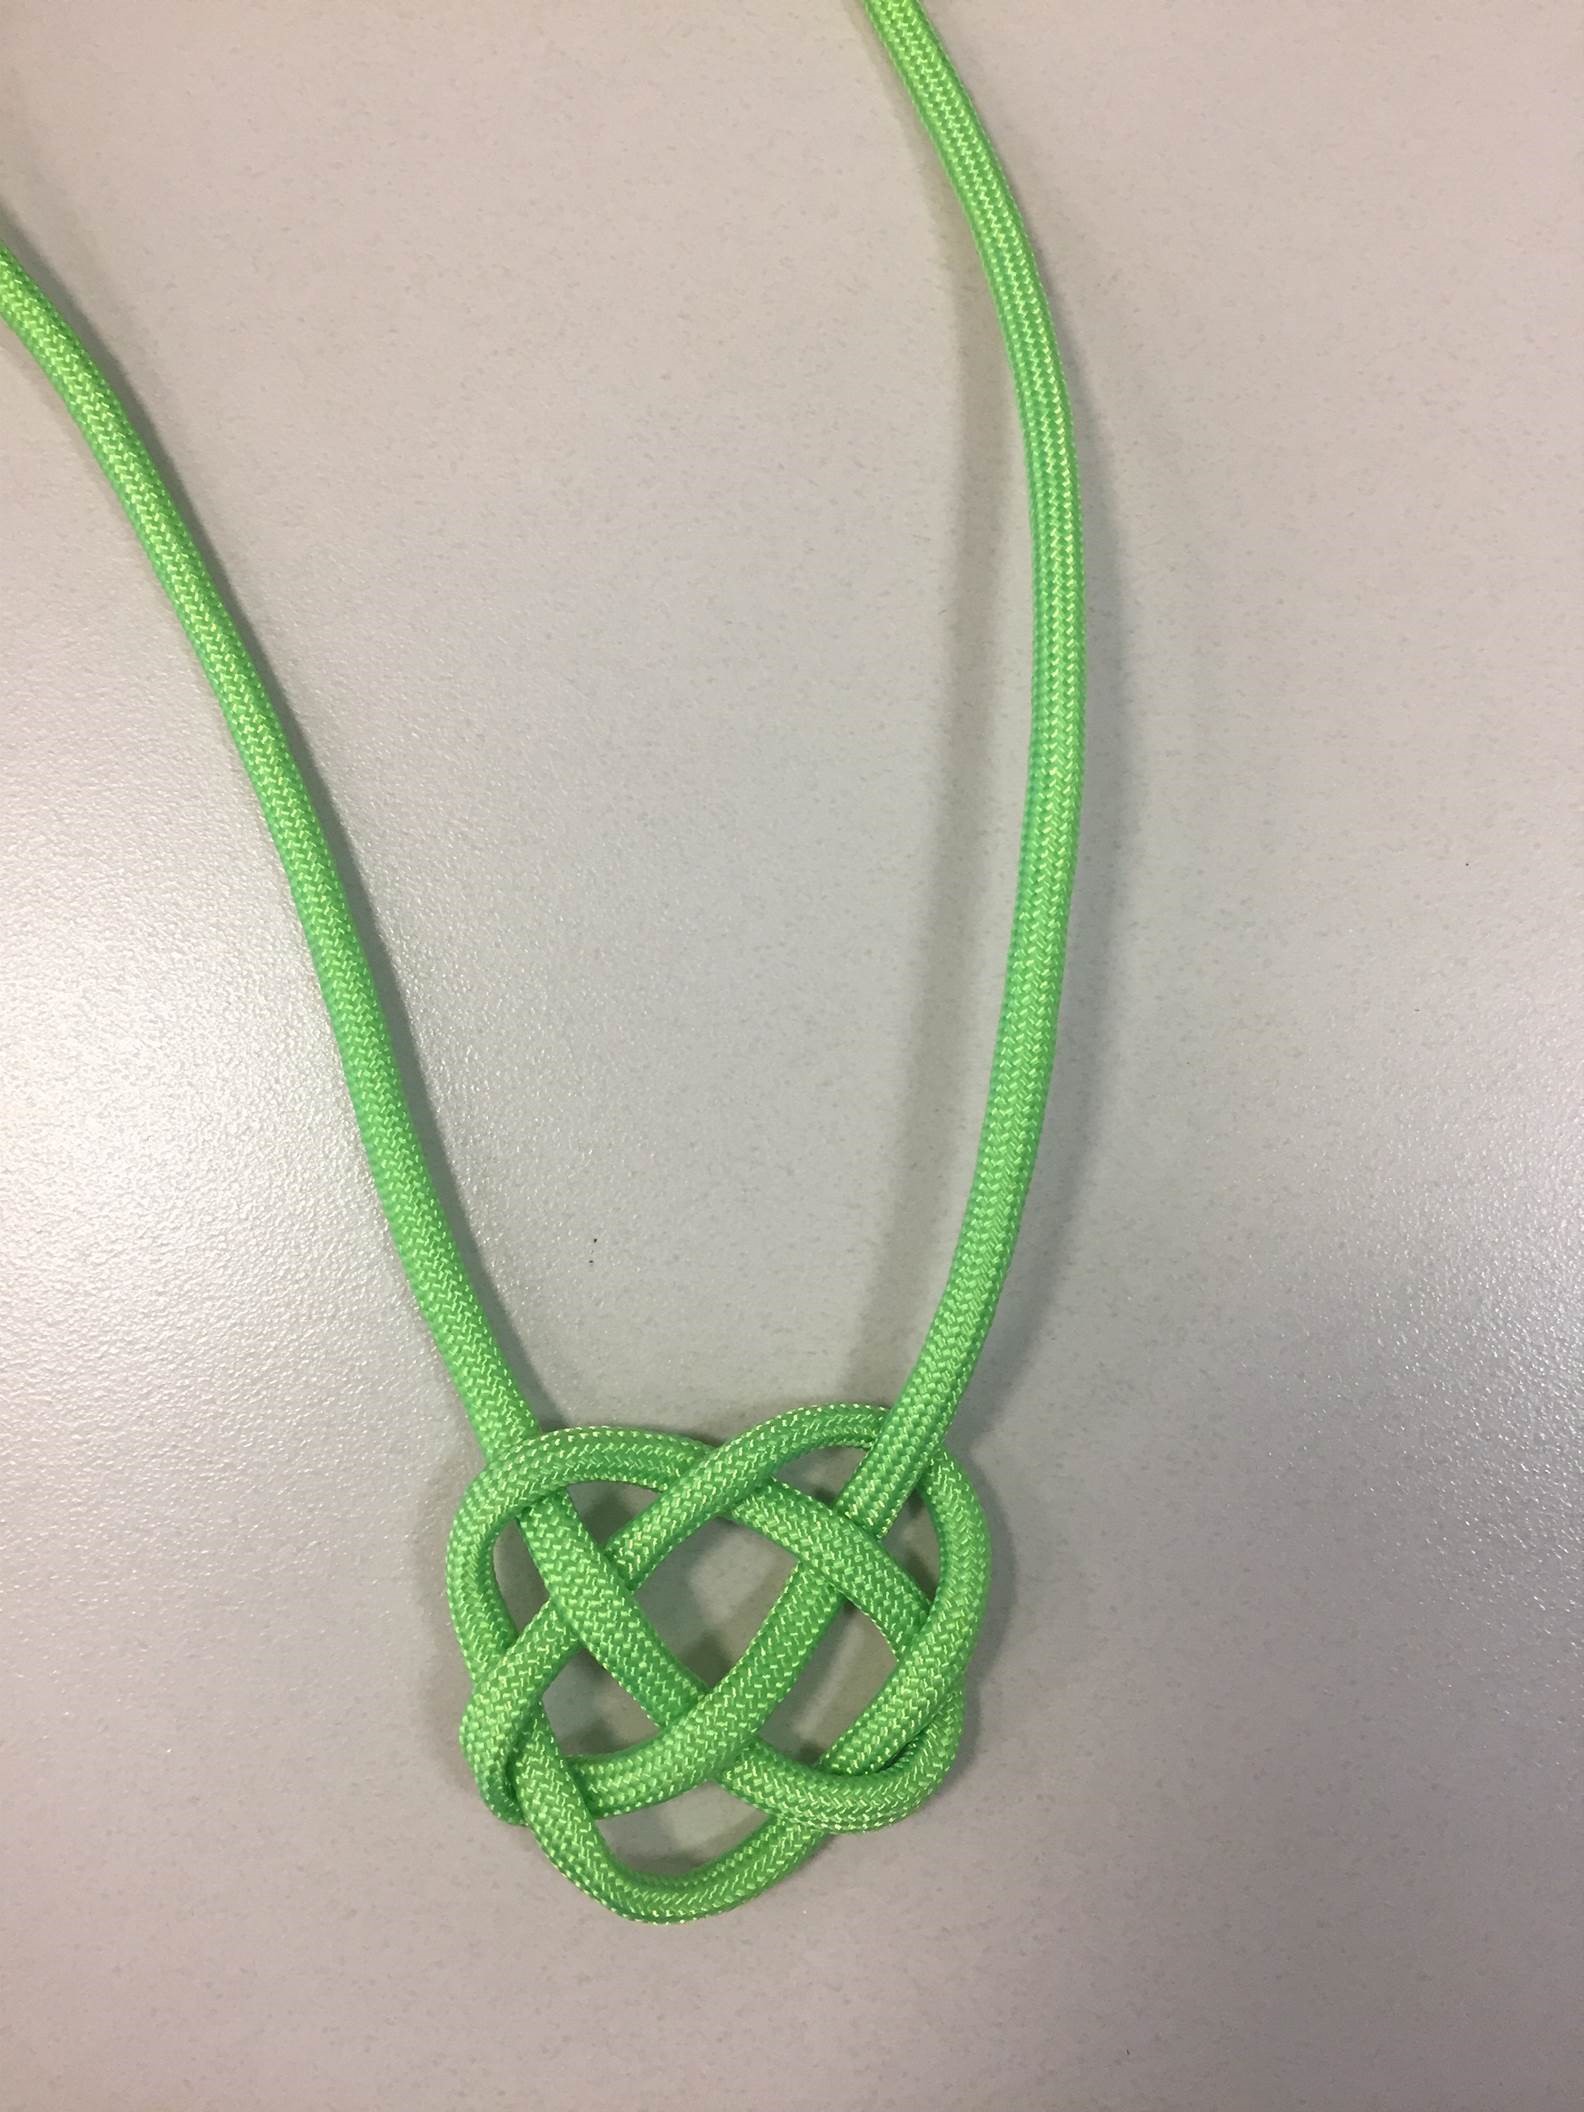 example of knot necklace